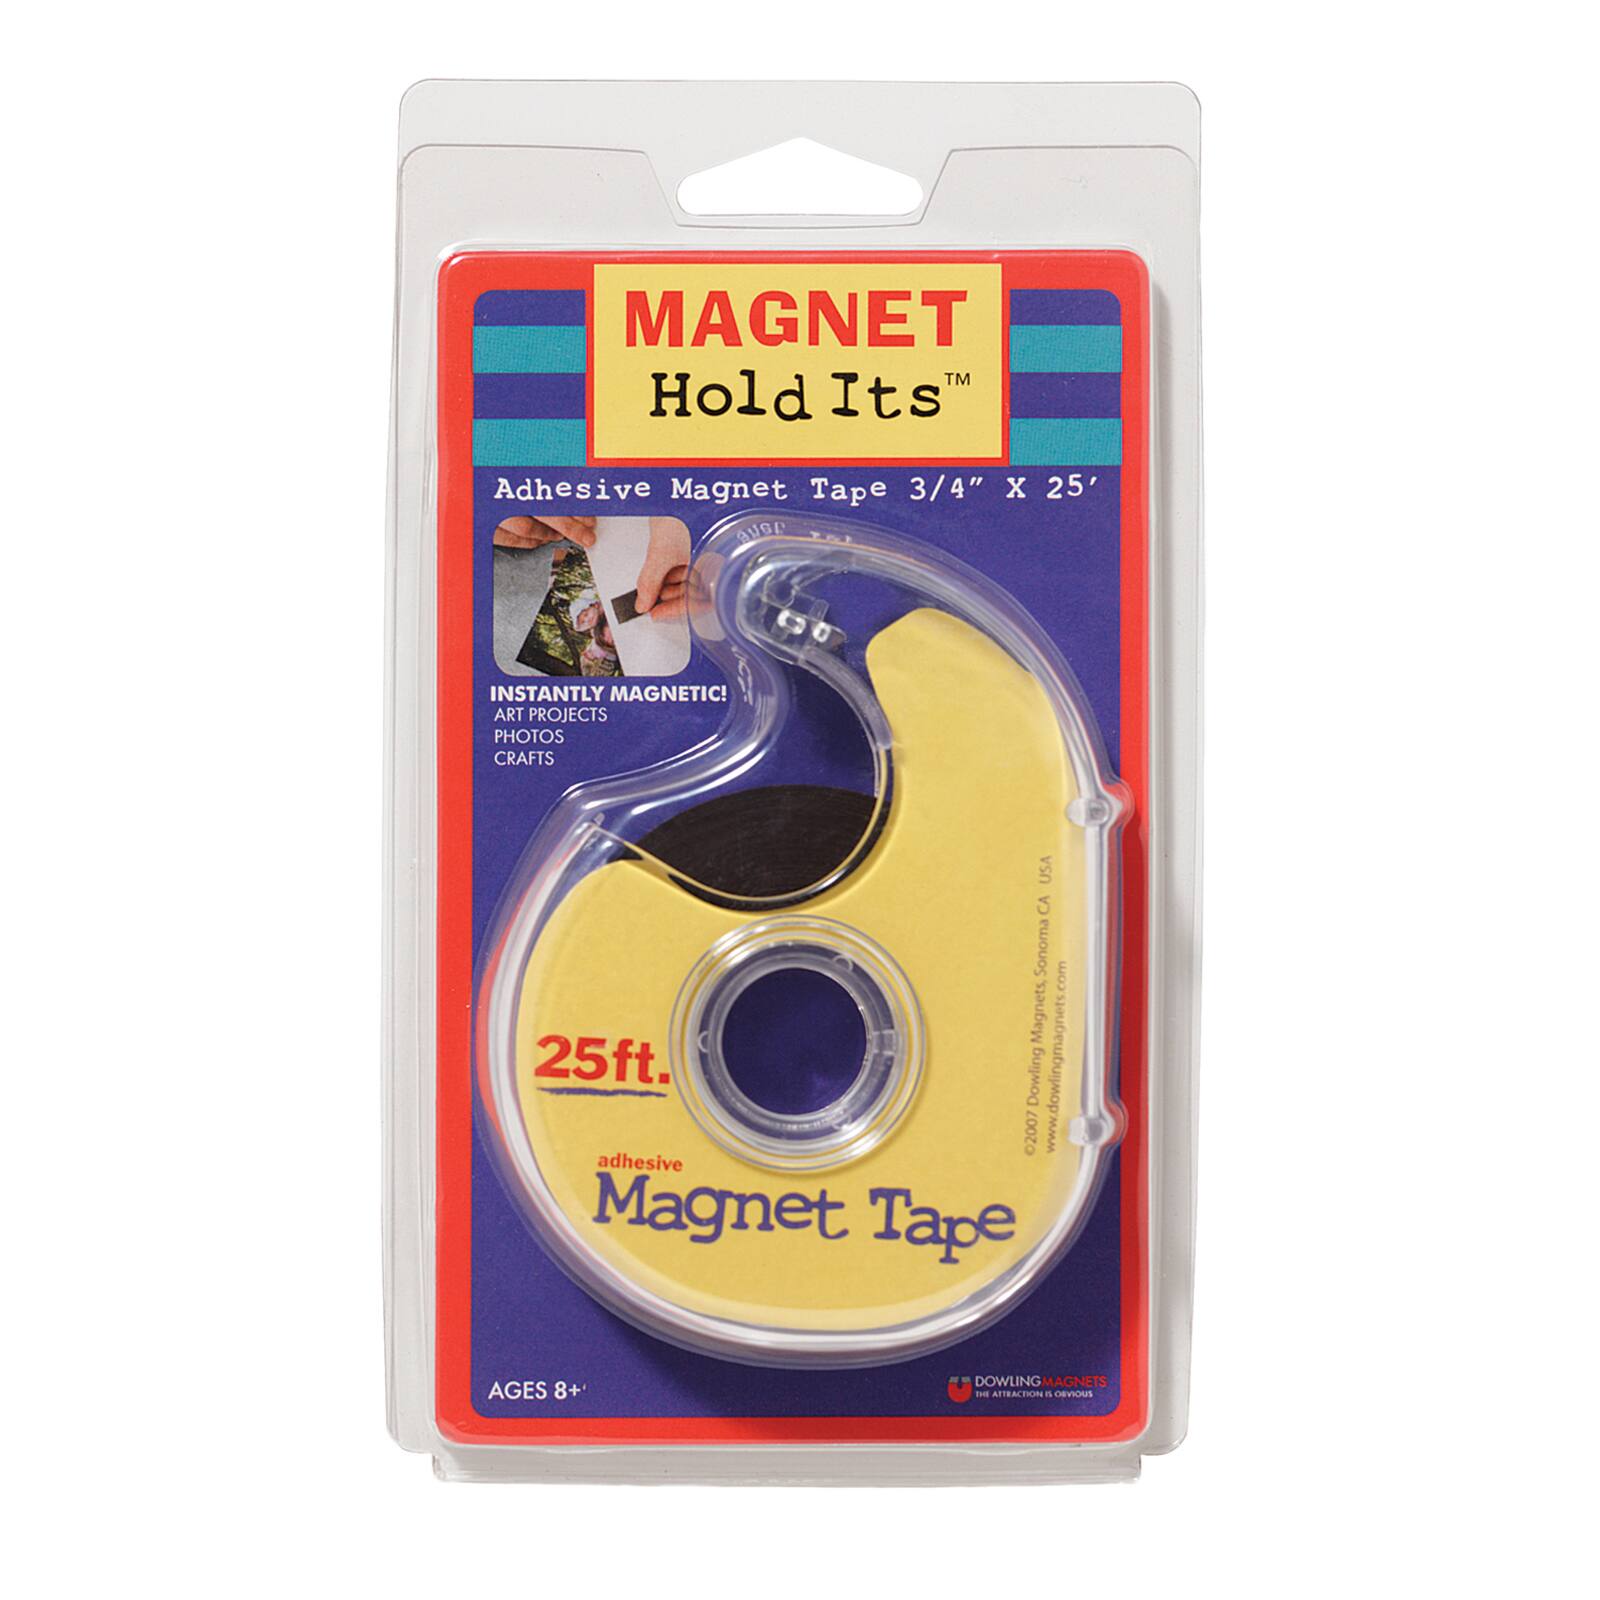 4 Packs: 6 ct. (24 total) Dowling Magnets&#xAE; Adhesive Magnet Tape